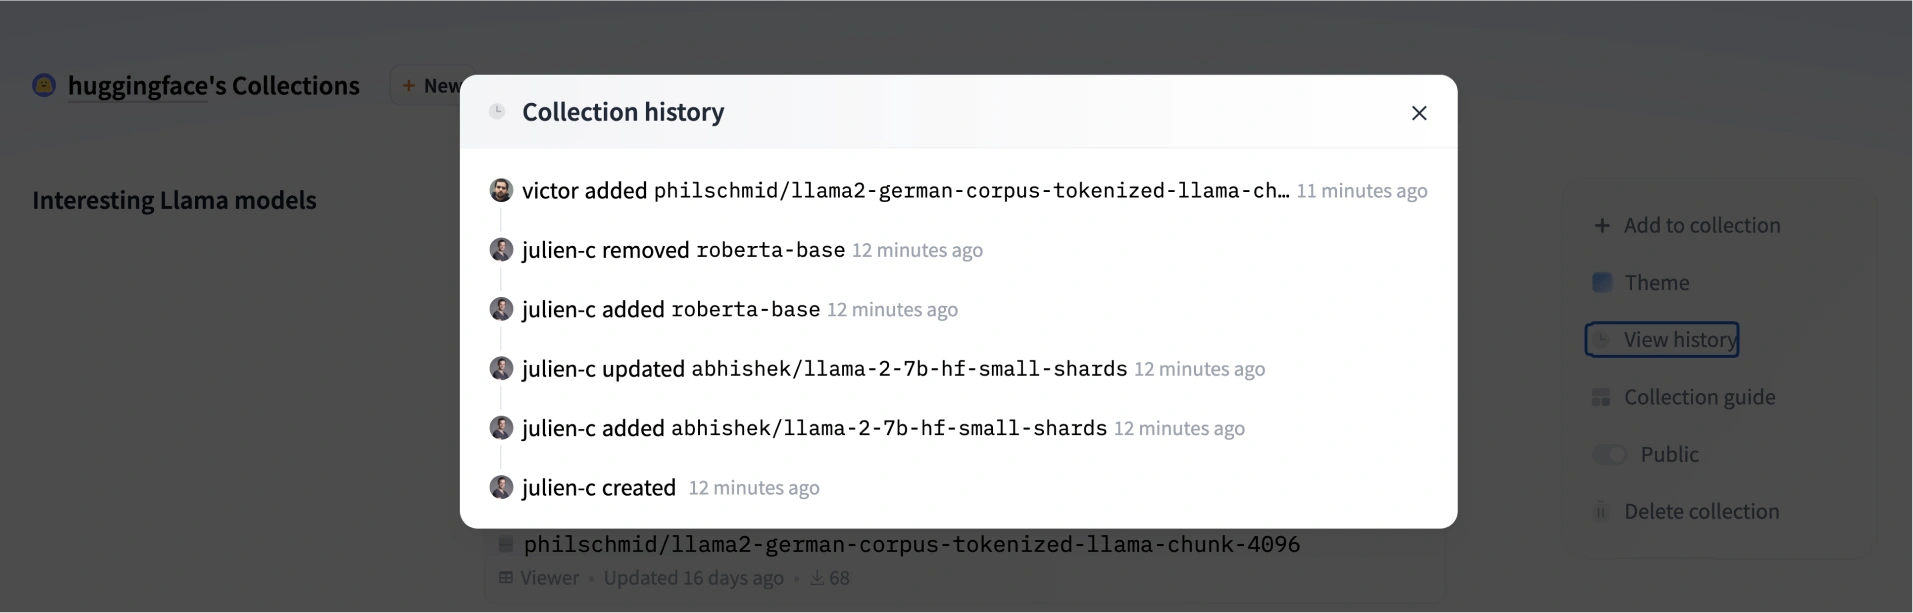 collections-history.webp